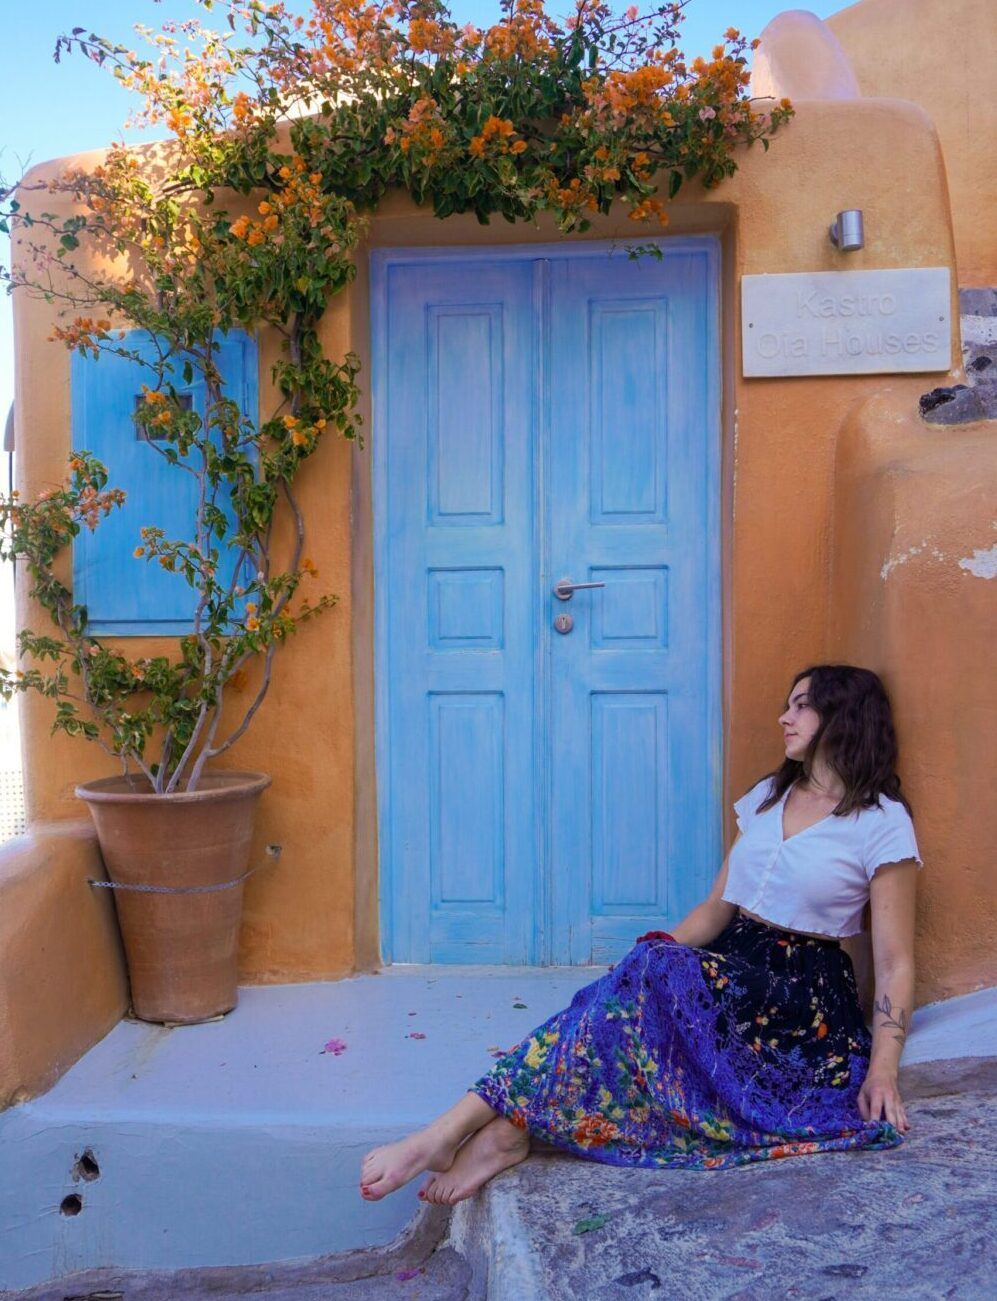 Alexa sits on the step in front of a blue door looking outward. She is wearing a white top and colorful skirt.